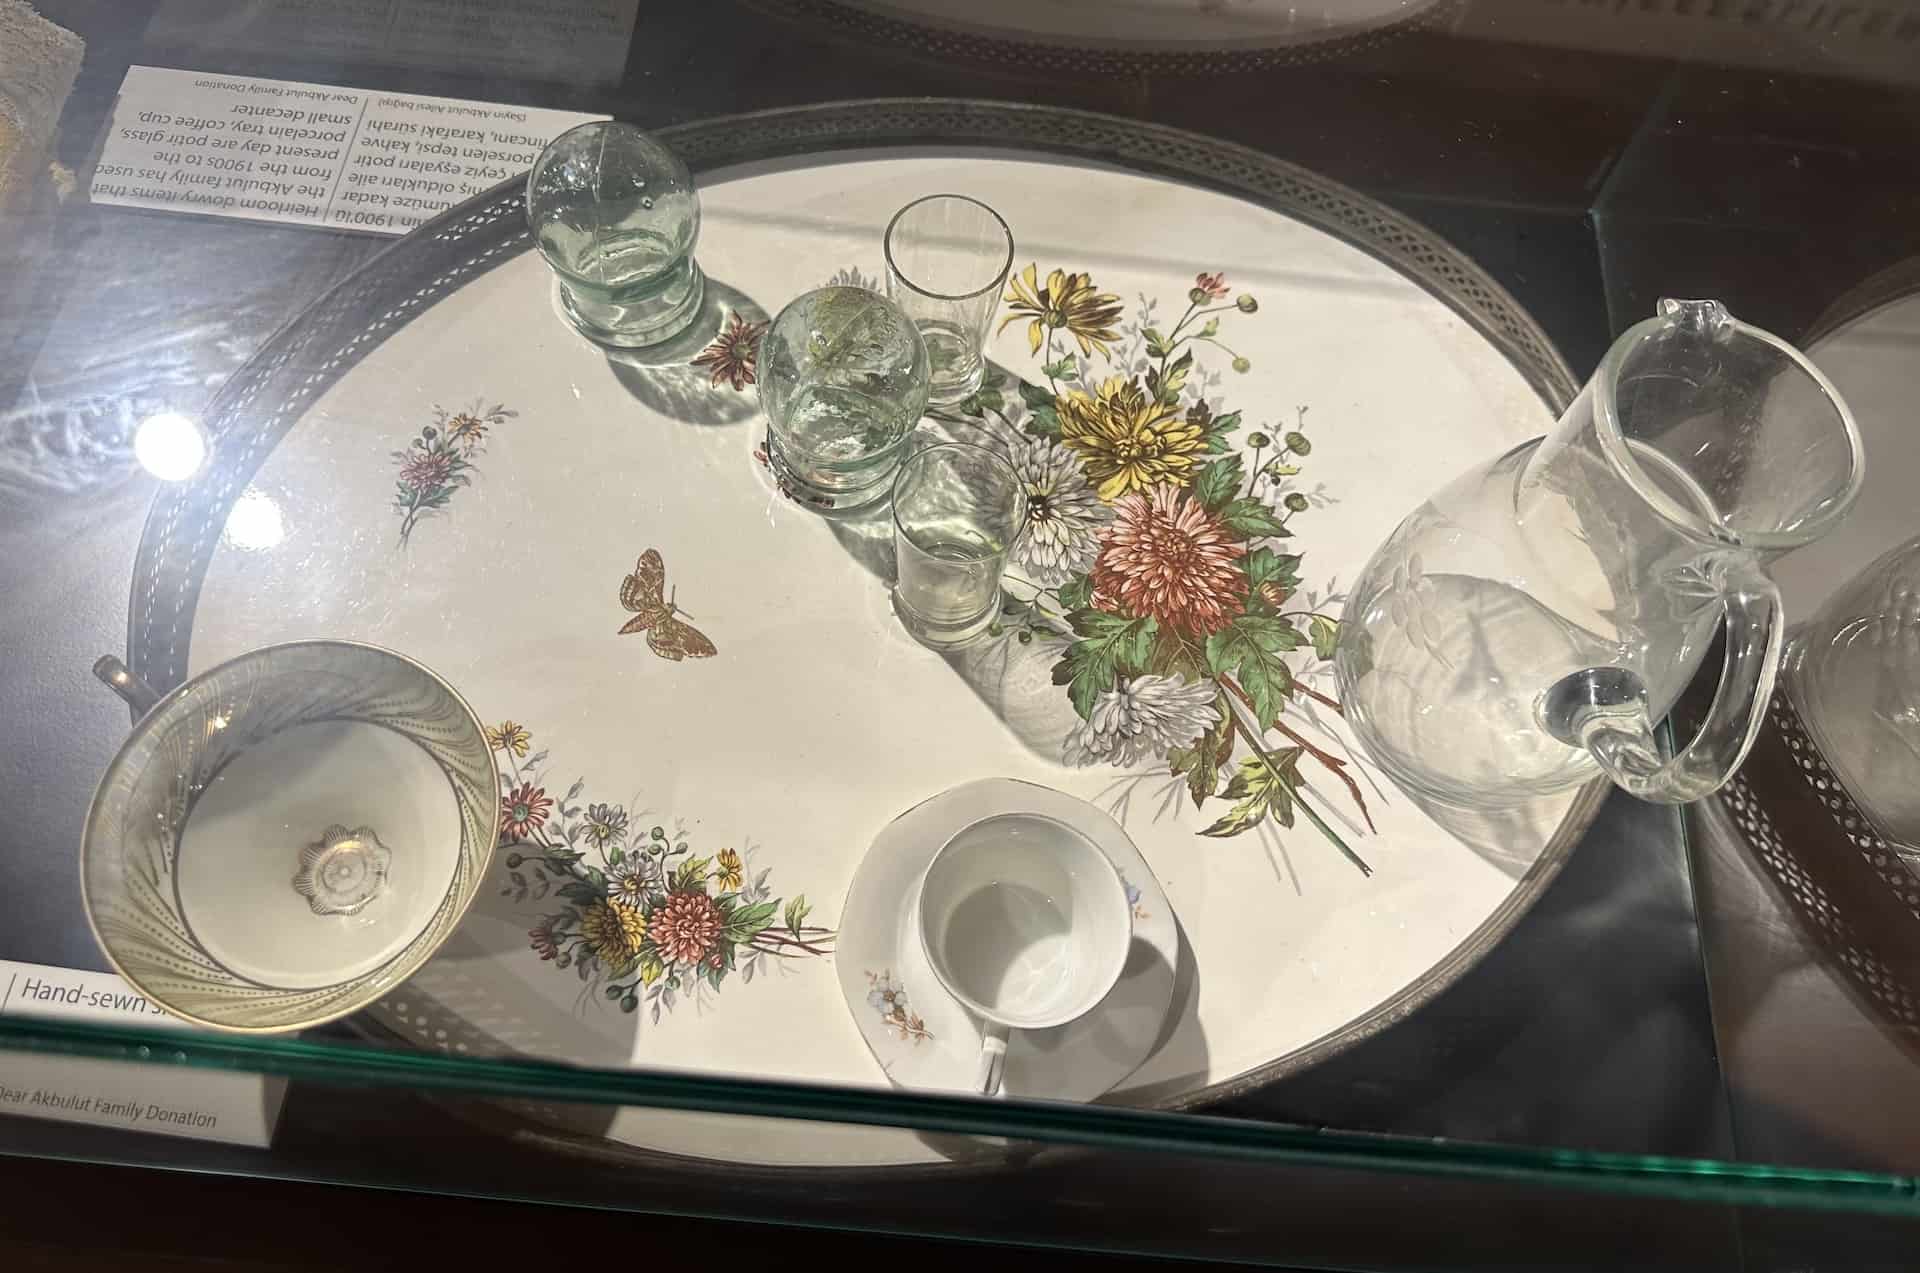 Glasses, coffee cups, and a decanter on a porcelain tray; early 20th century; donated by the Akbulut family in the immigration section at the Selçuk City Memory Museum